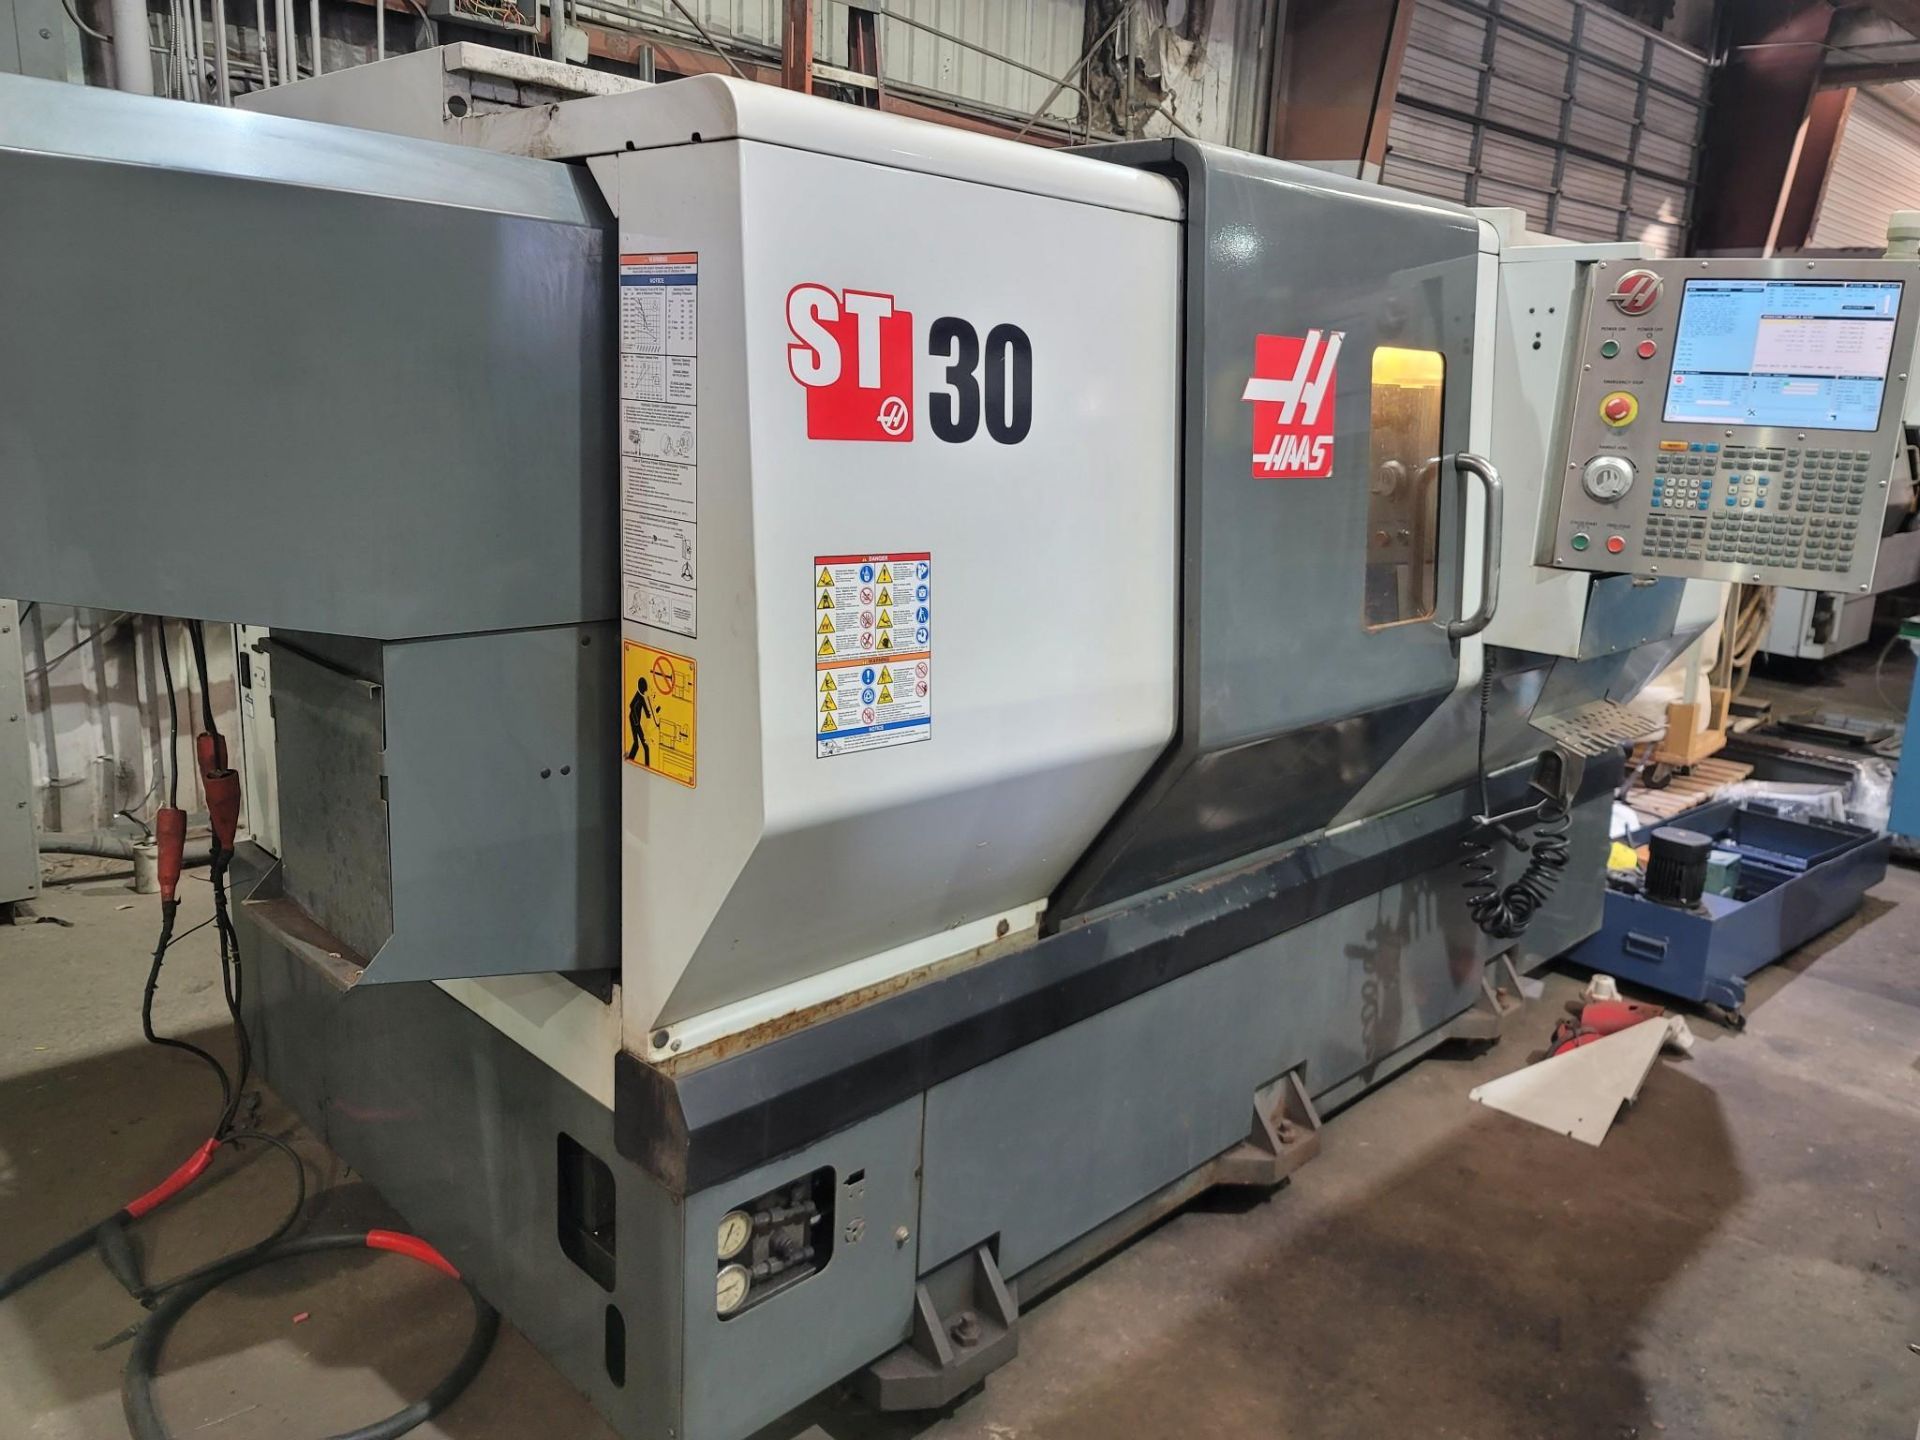 Haas ST-30 CNC Lathe, S/N 3097064 - Image 4 of 26